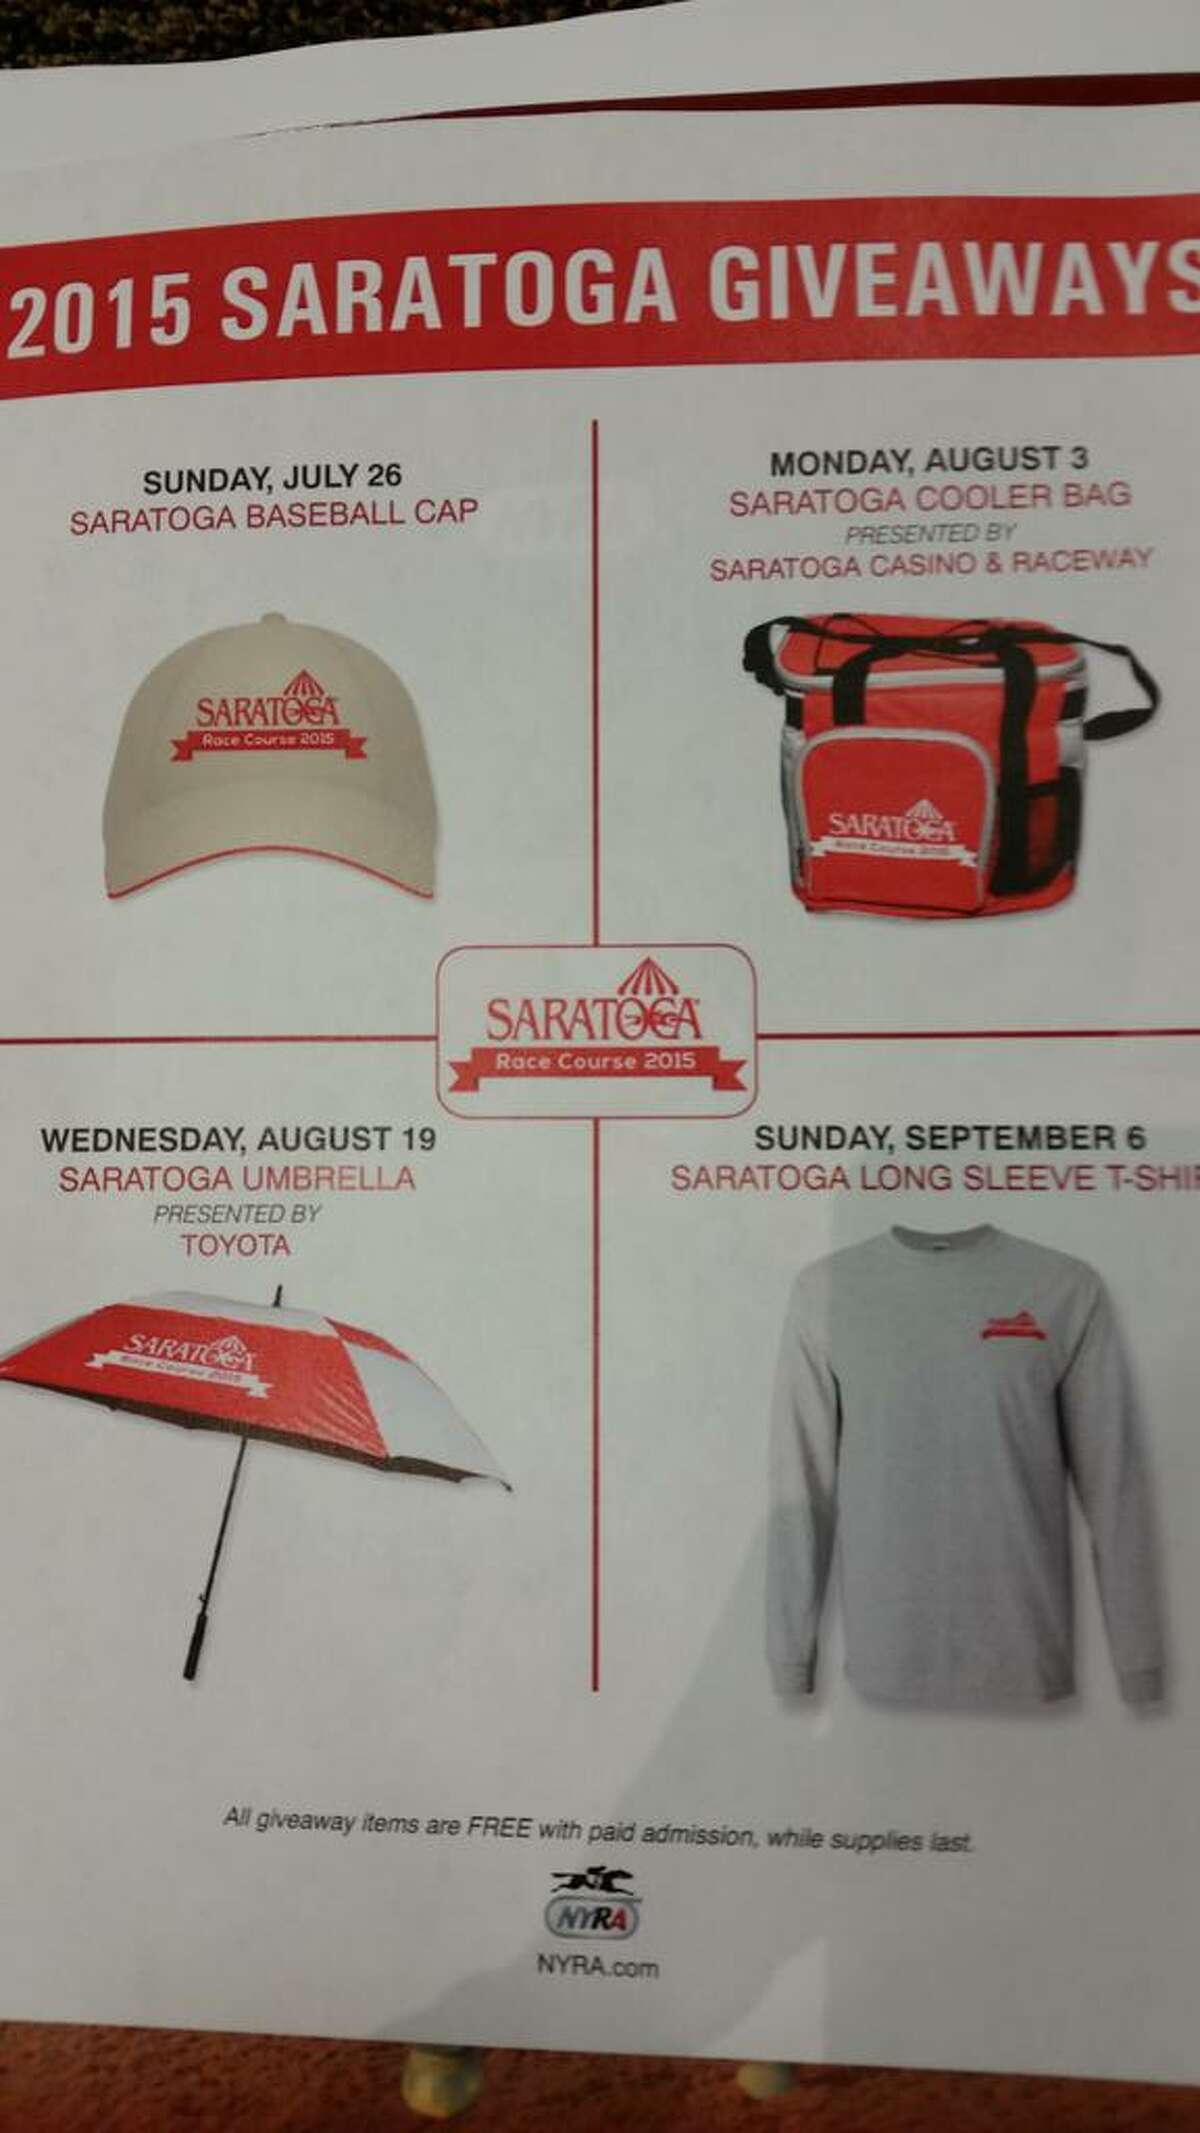 Here are the giveaways for this year's race meet in Saratoga Springs